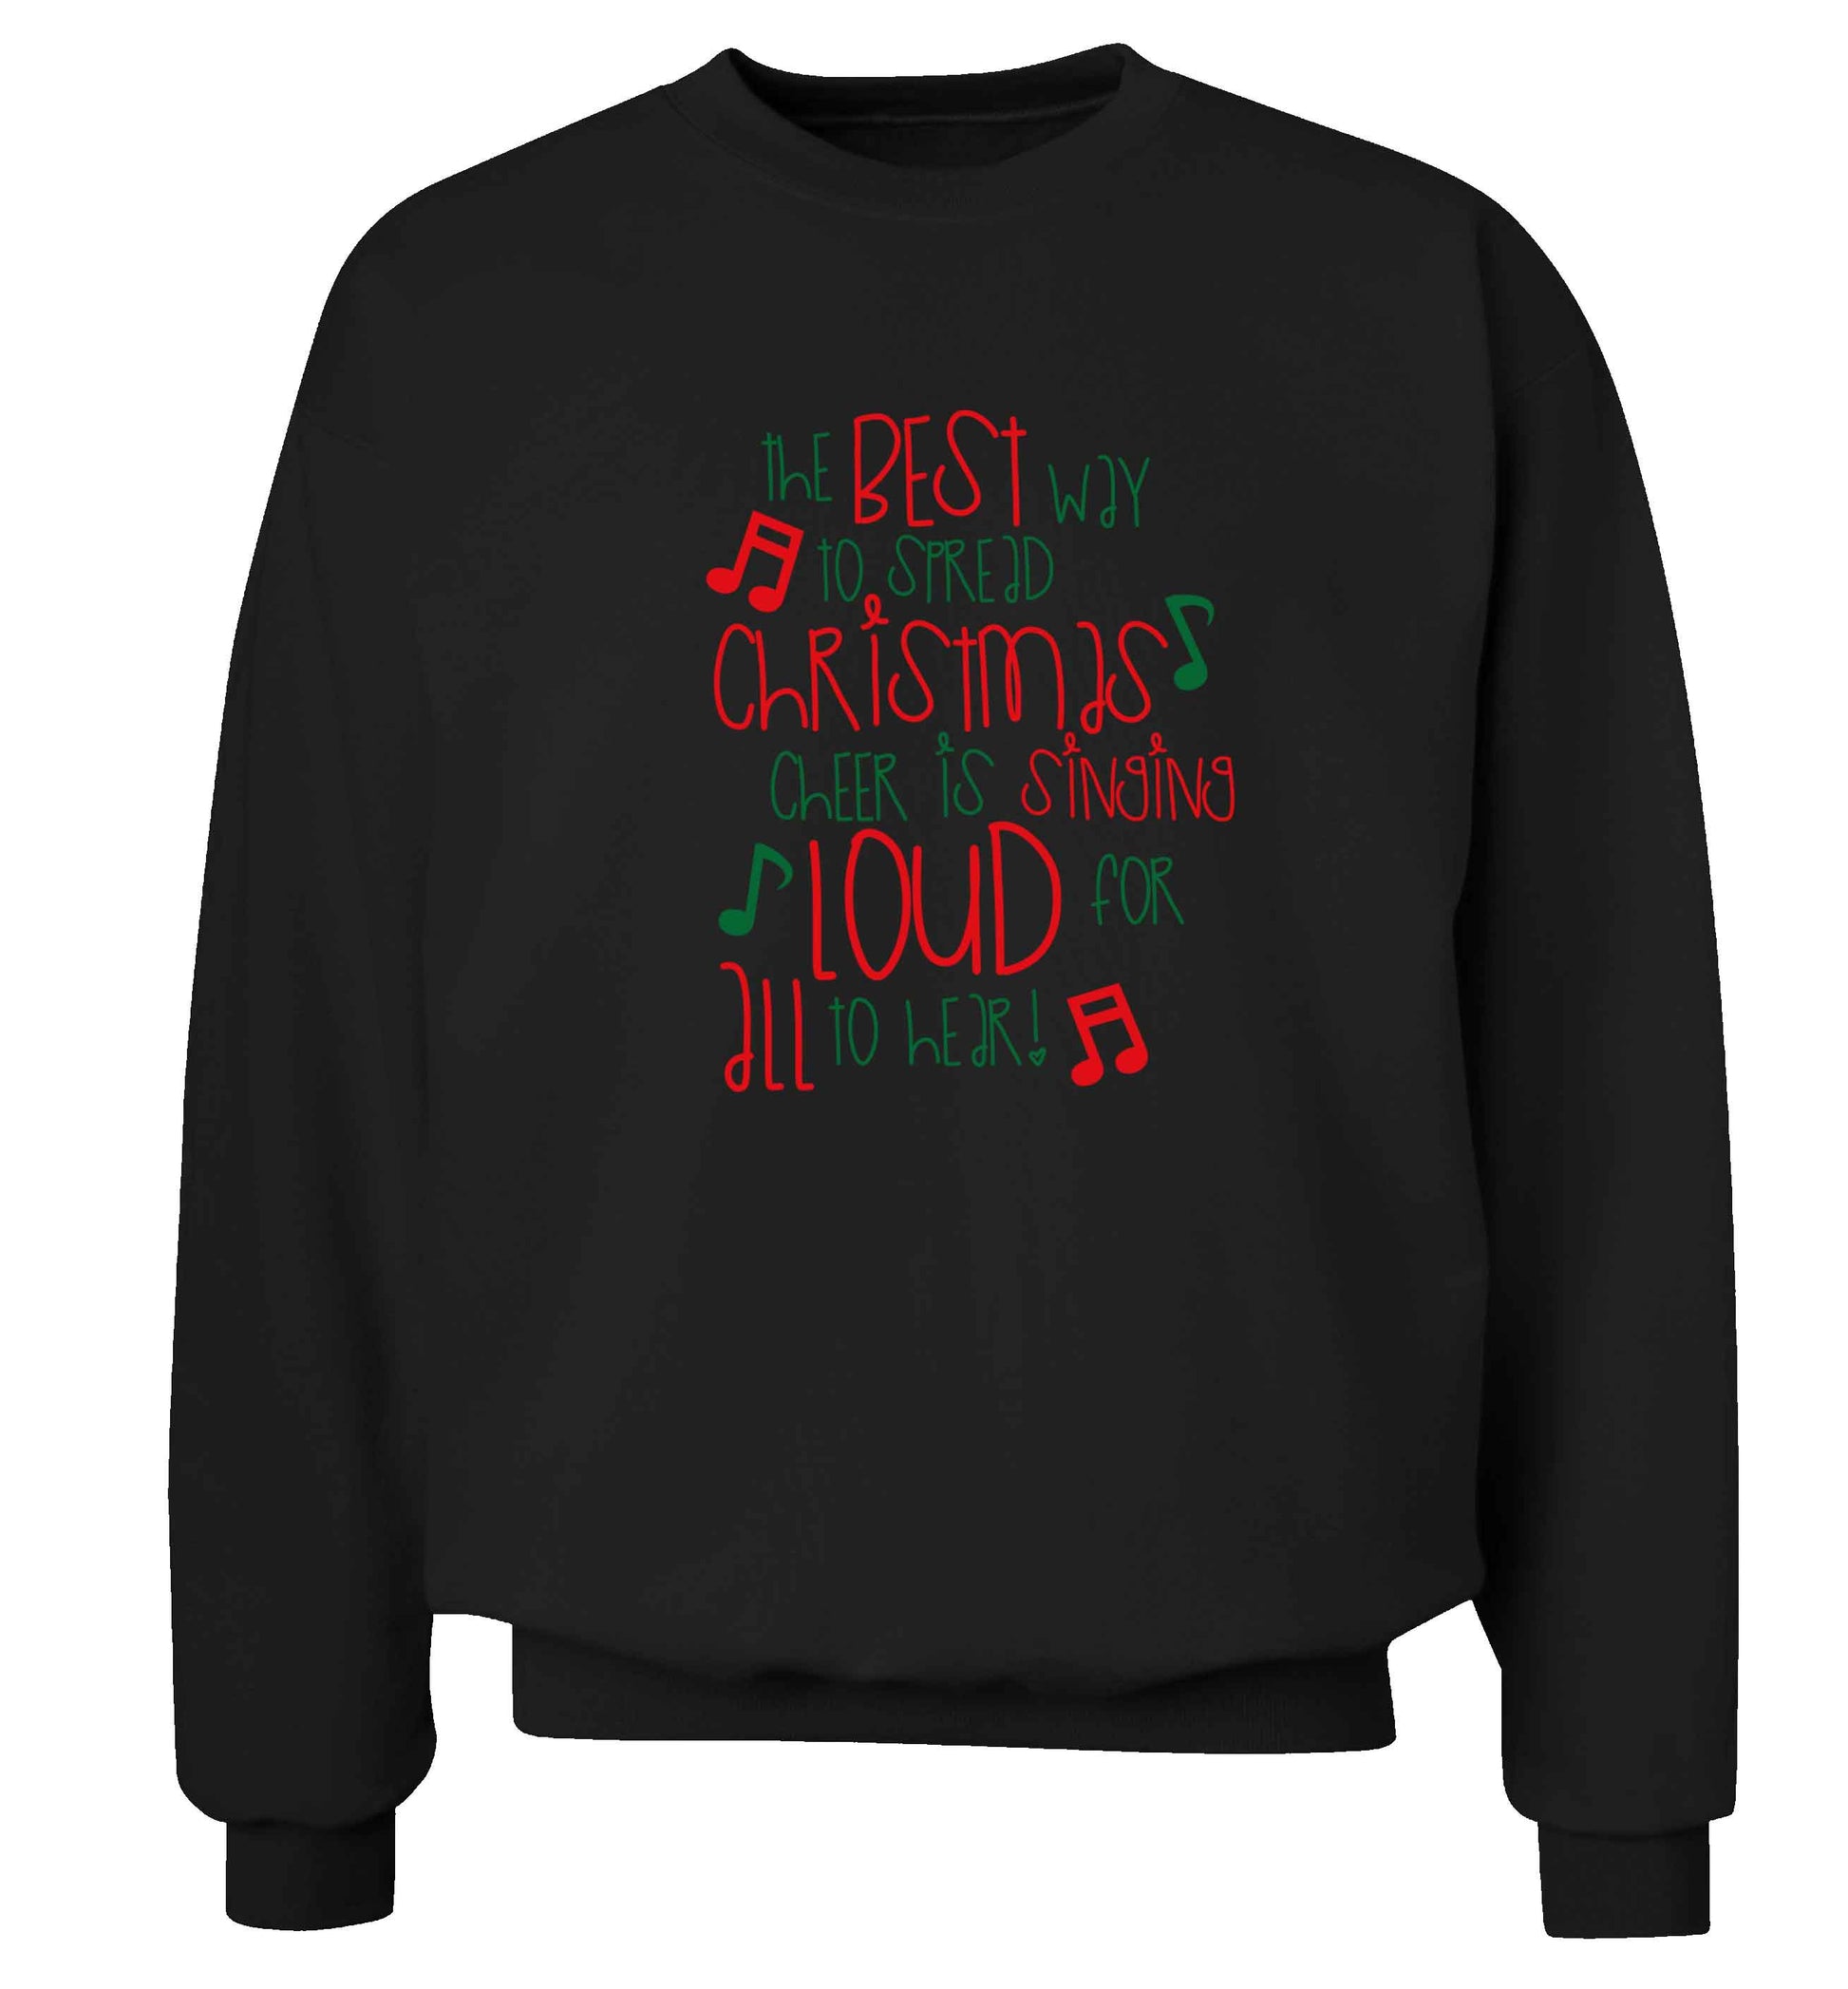 The best way to spread Christmas cheer is singing loud for all to hear adult's unisex black sweater 2XL